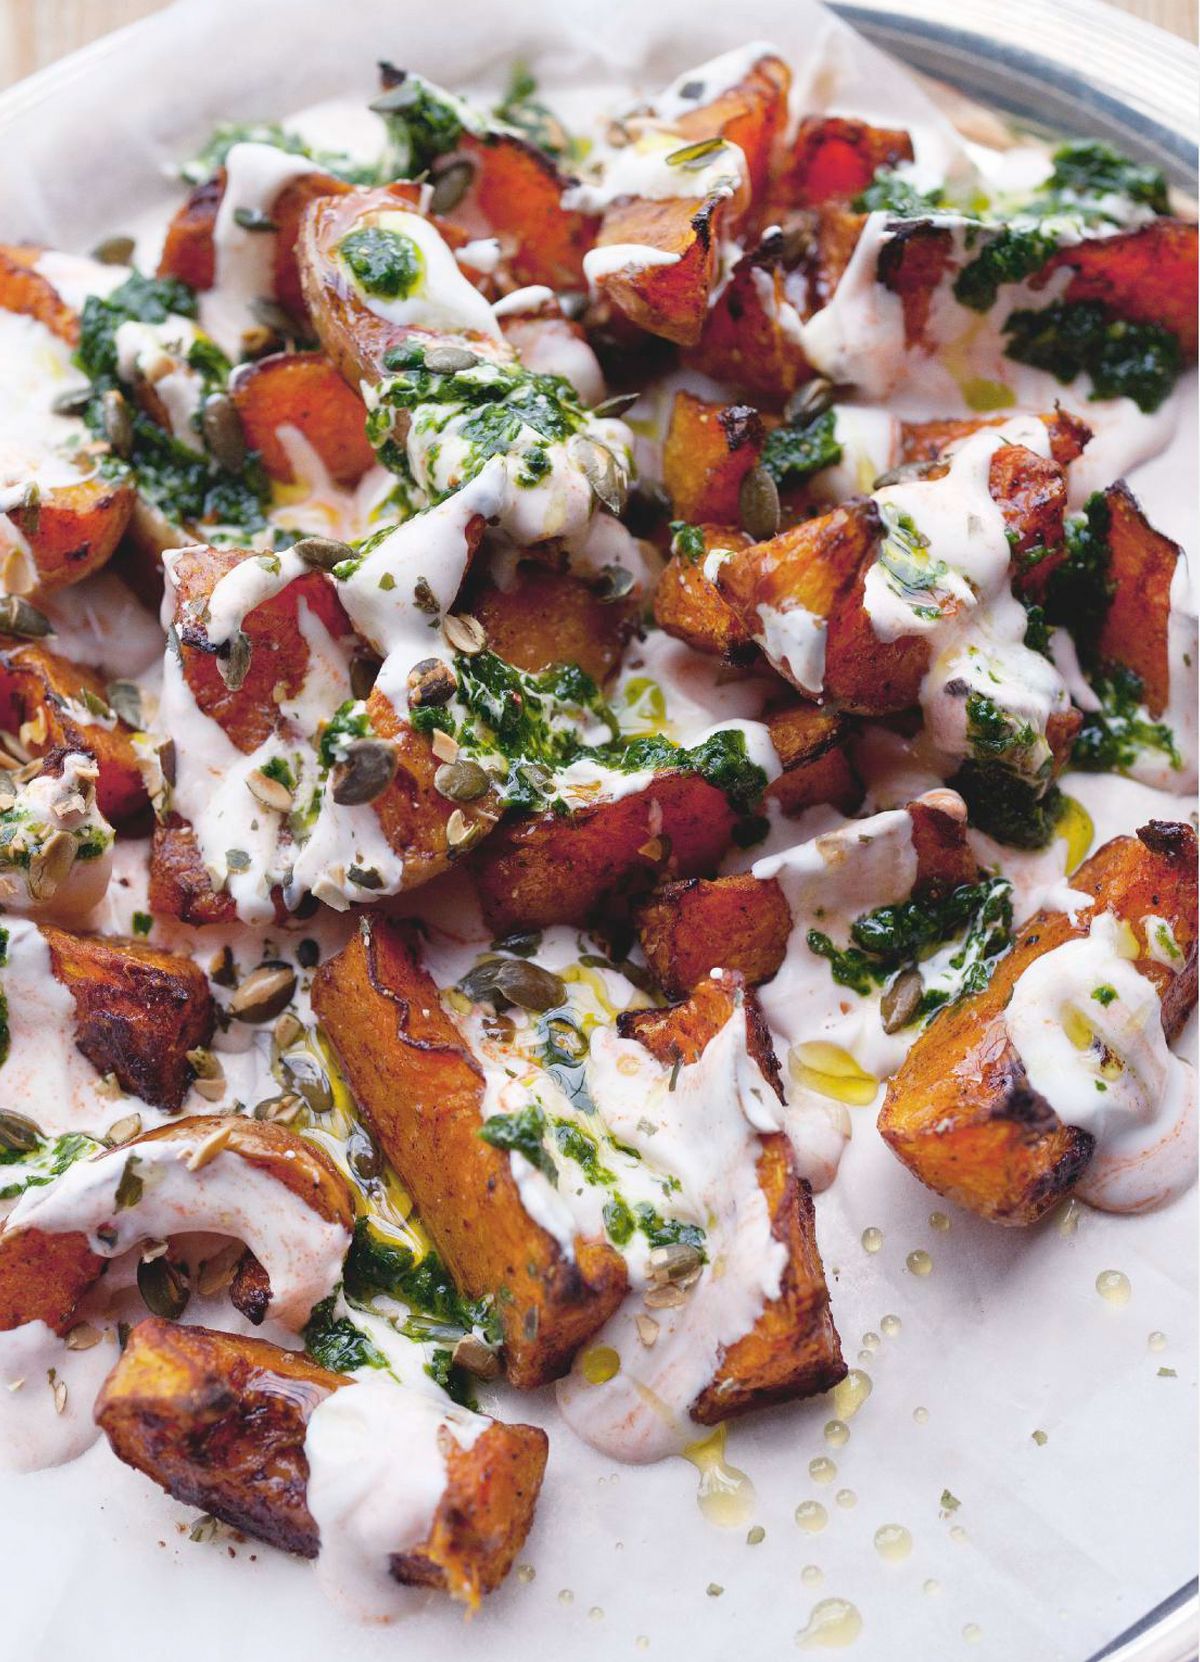 Ottolenghi’s Squash with Chilli Yoghurt and Coriander Sauce